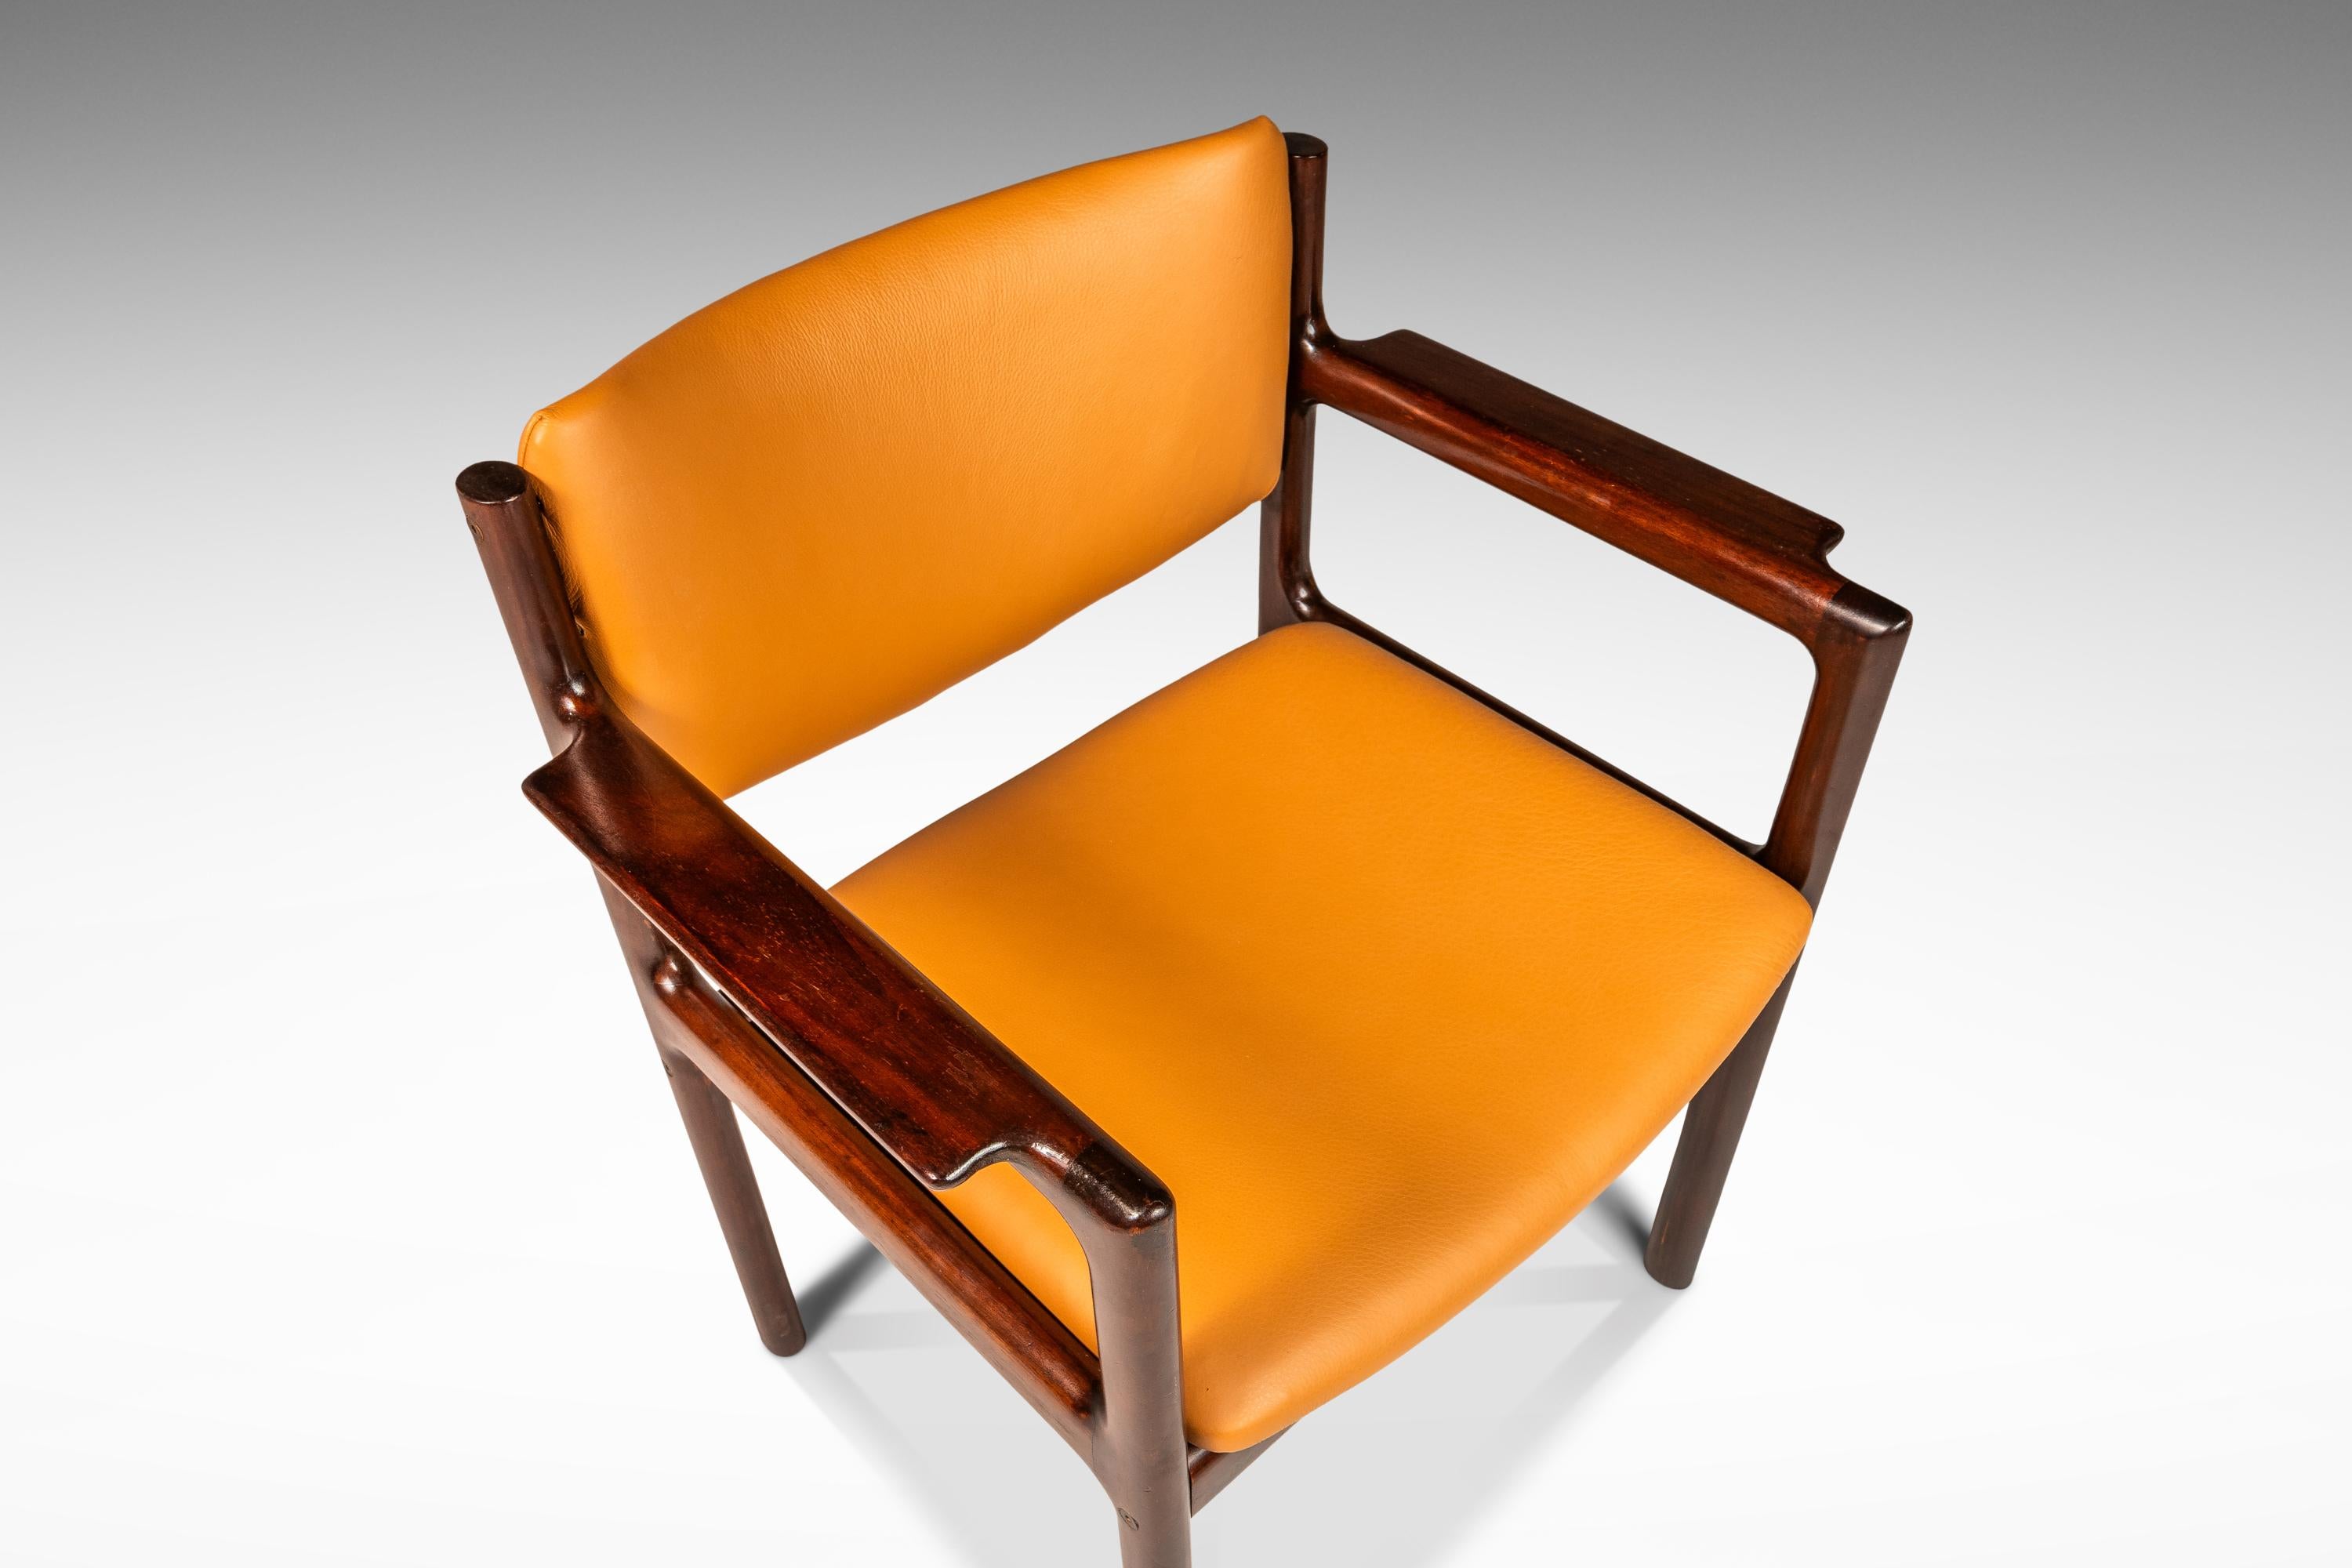 Set of 4 Mahogany Arm Chairs, Caramel Leather by Danish Overseas Imports, 1960's For Sale 9